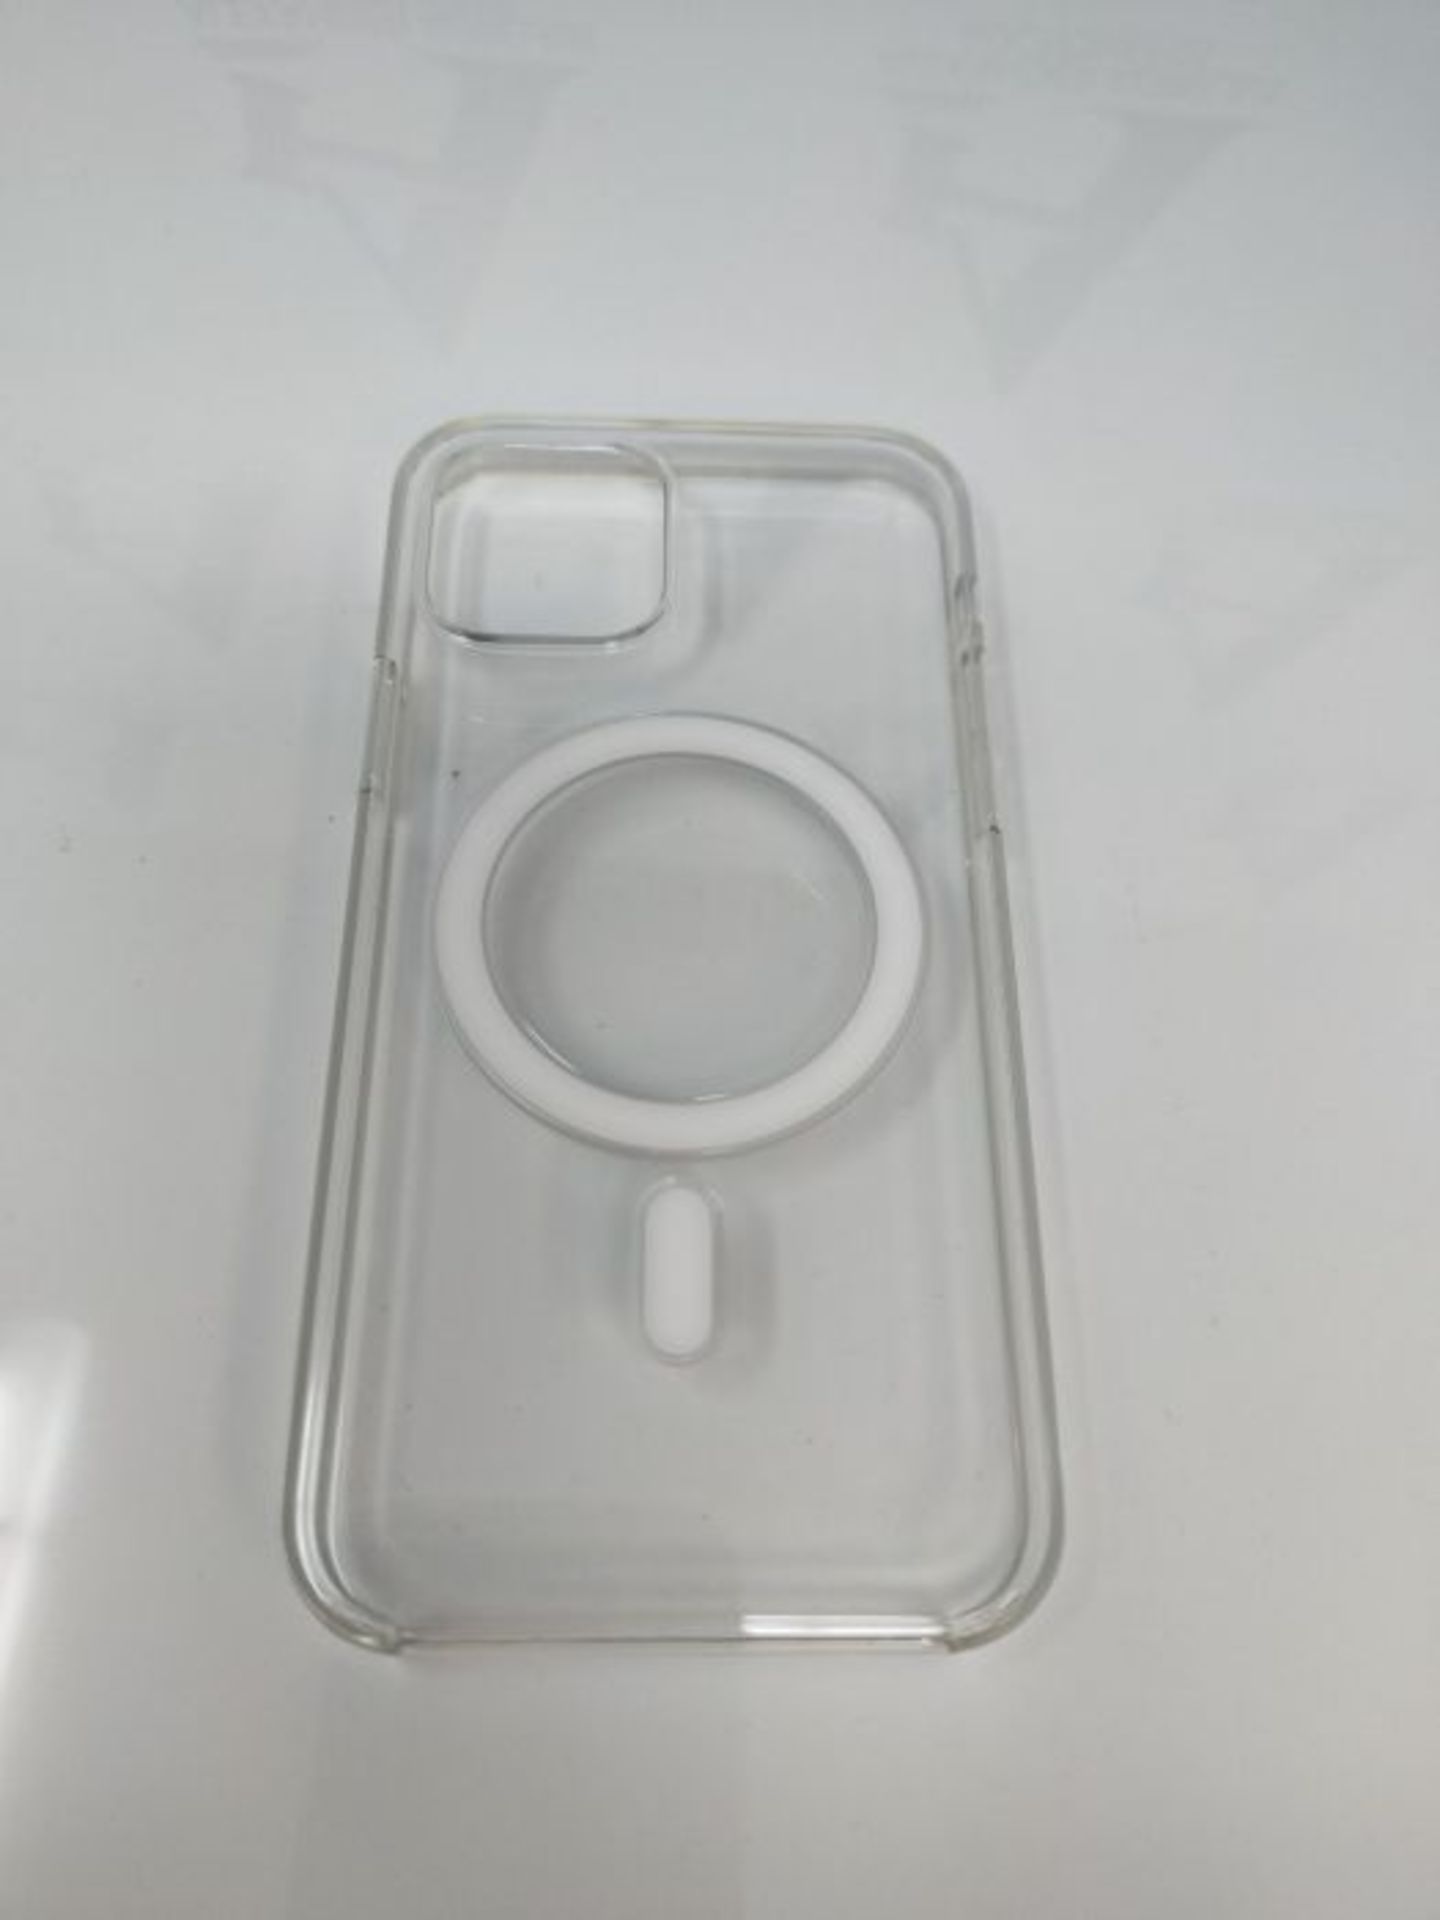 Apple Clear Case (for iPhone 12 | 12 Pro) - 6.1 inches - Image 3 of 3